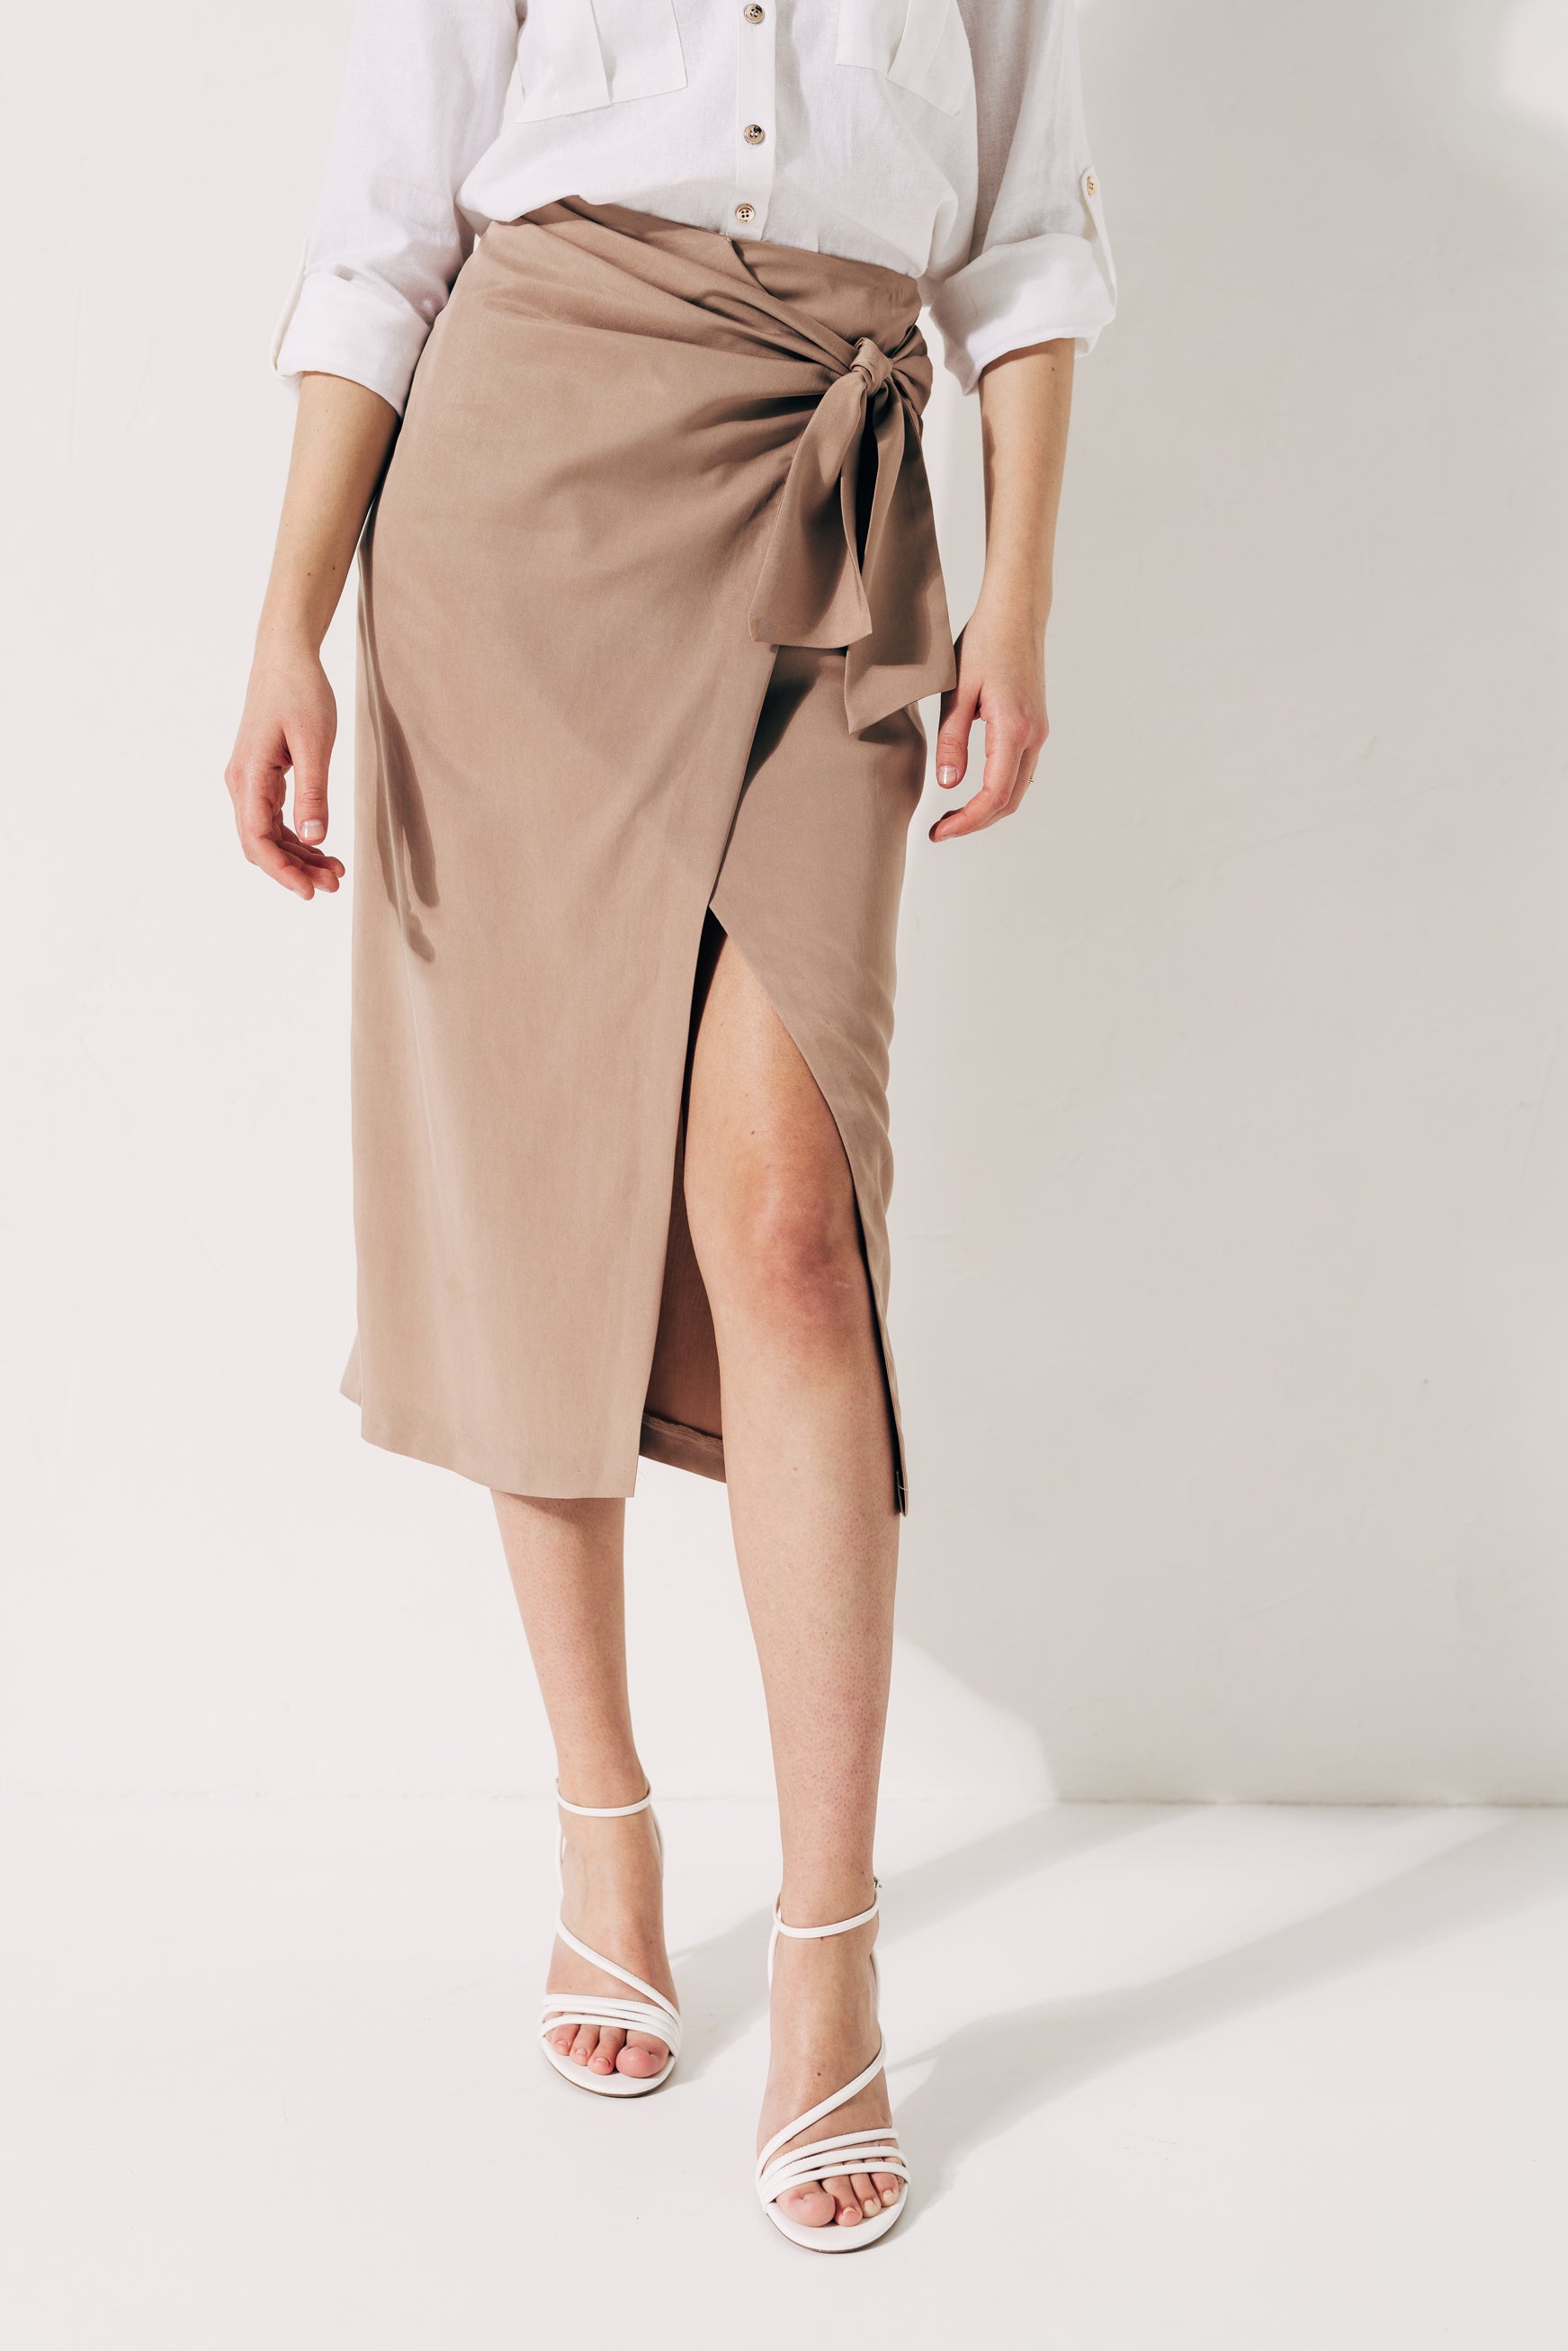 100% Lyocell high-waist midi skirt with front knot and slit